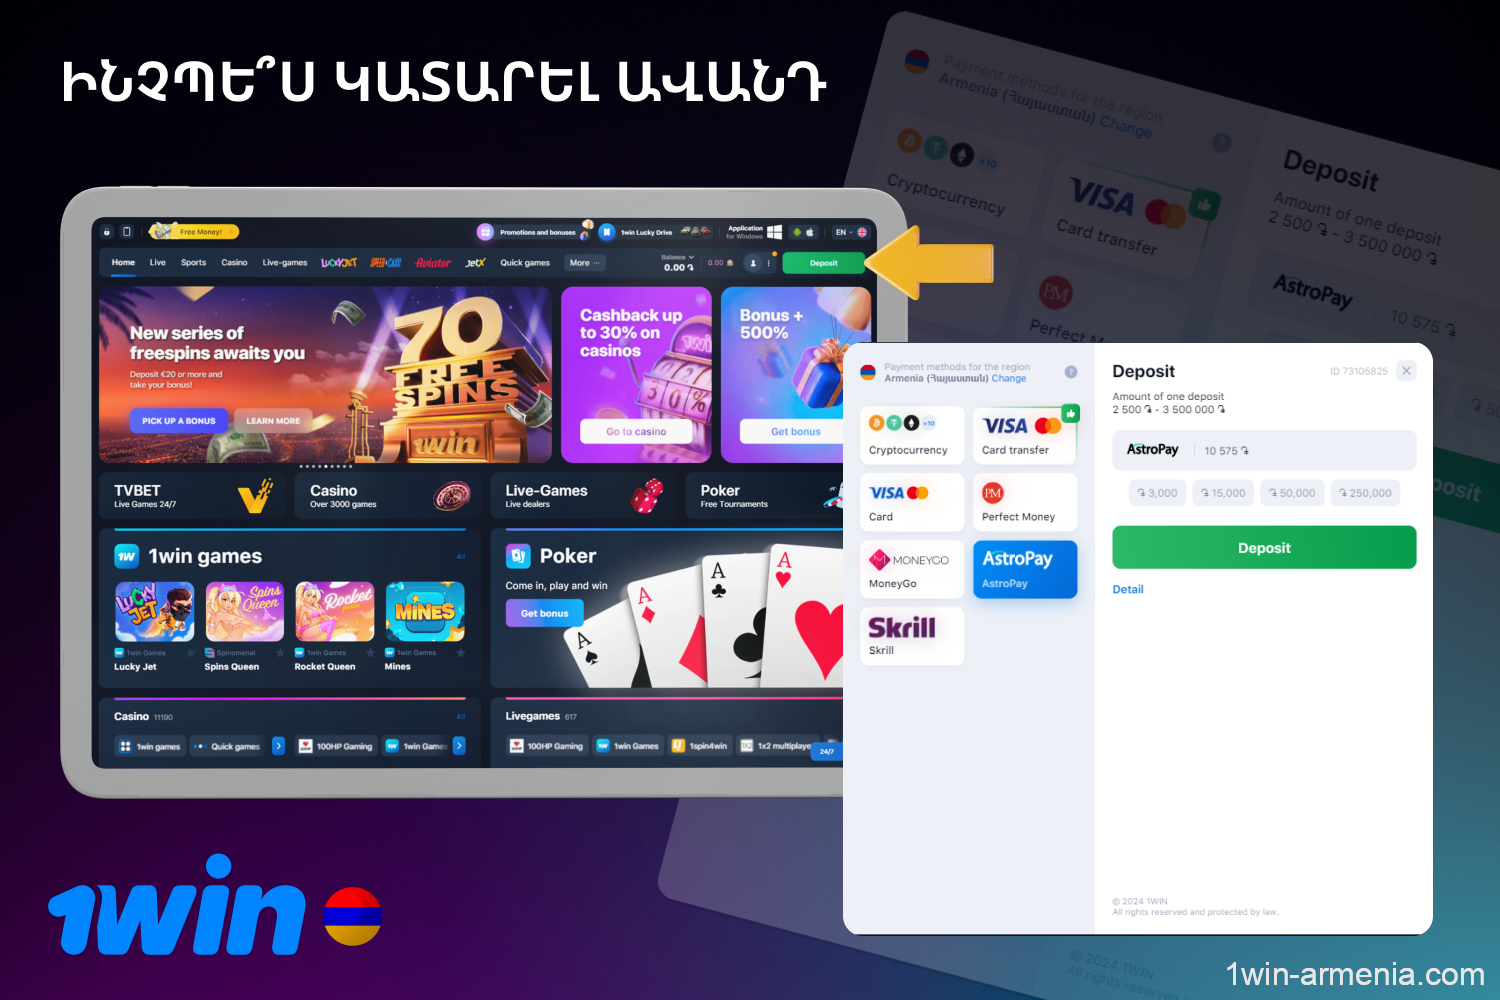 To make a deposit to a 1win account, Armenian players must log in to their account and select the most convenient payment method